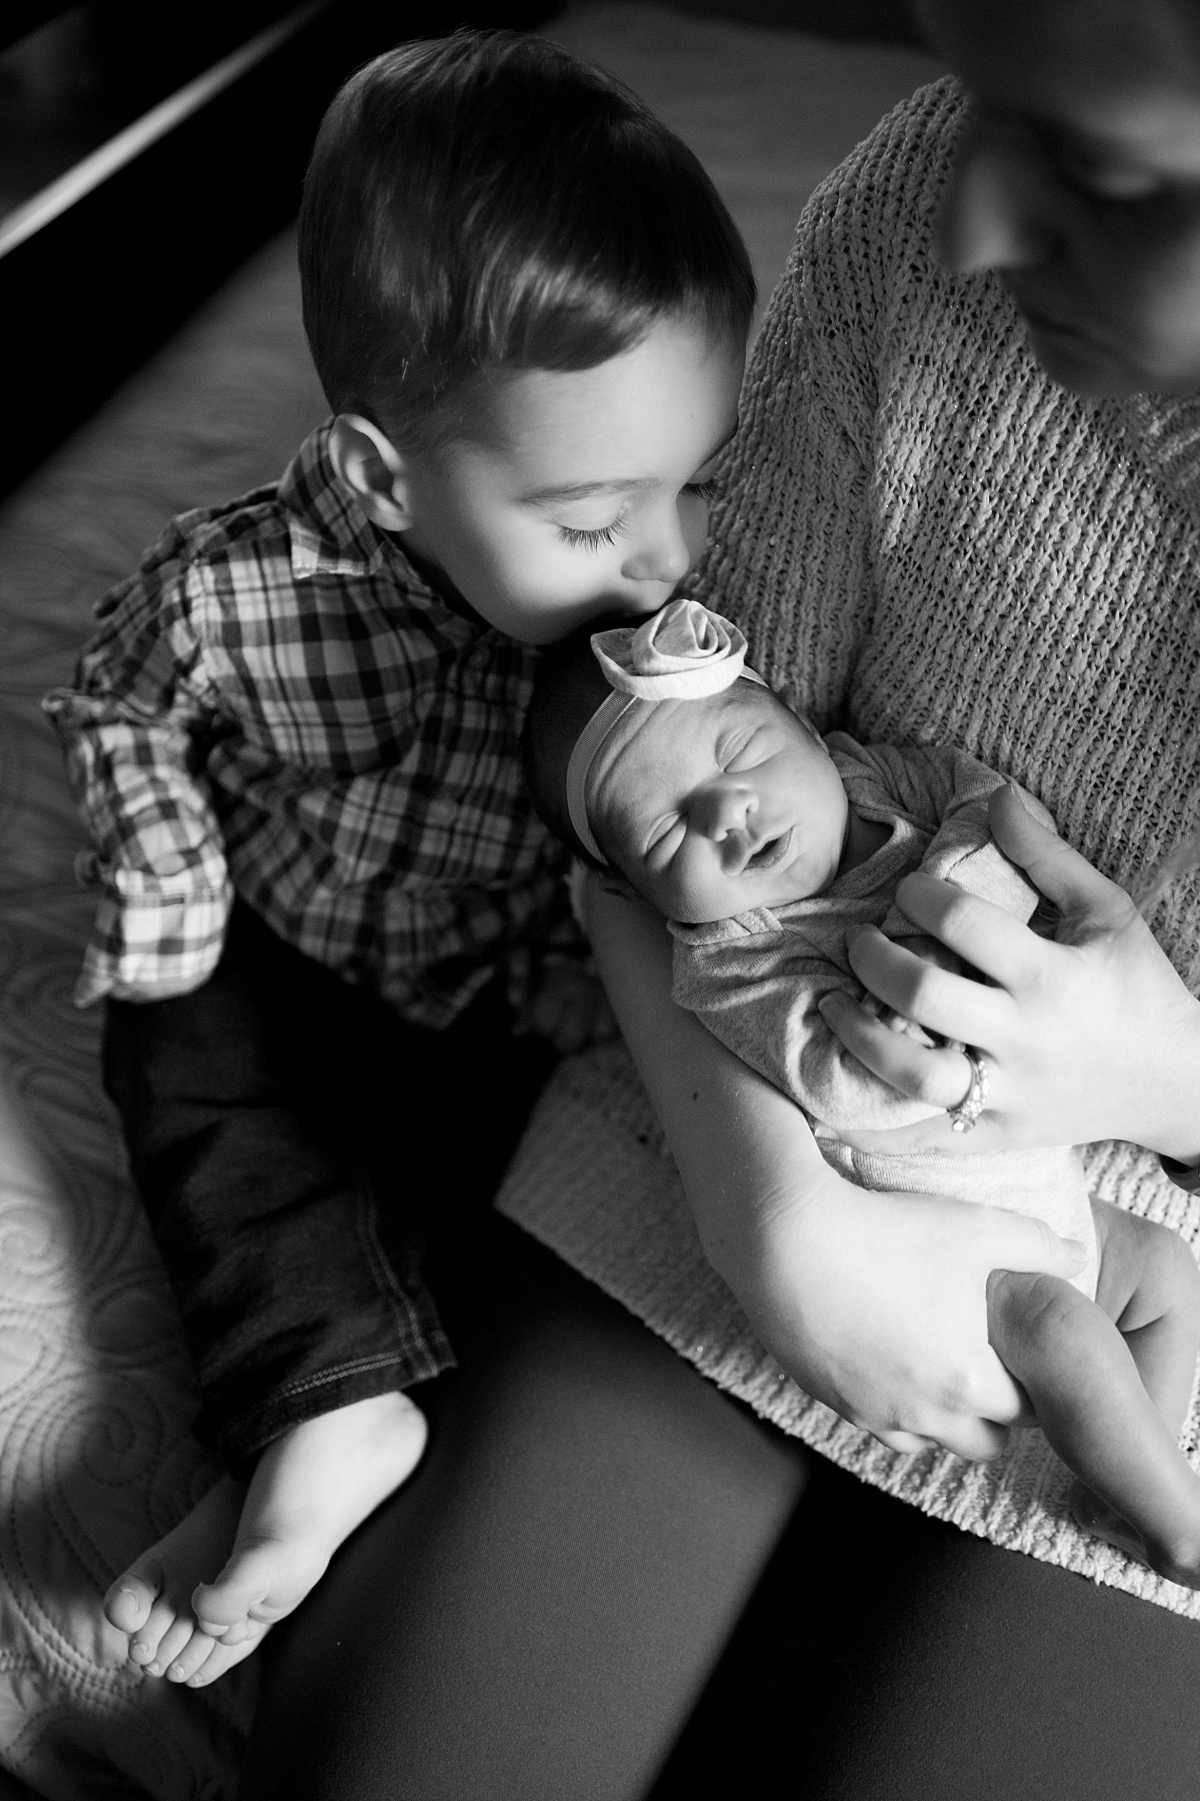 Newborn pose with sibling in black and white in Fairfax, VA by Erin Tetterton Photography